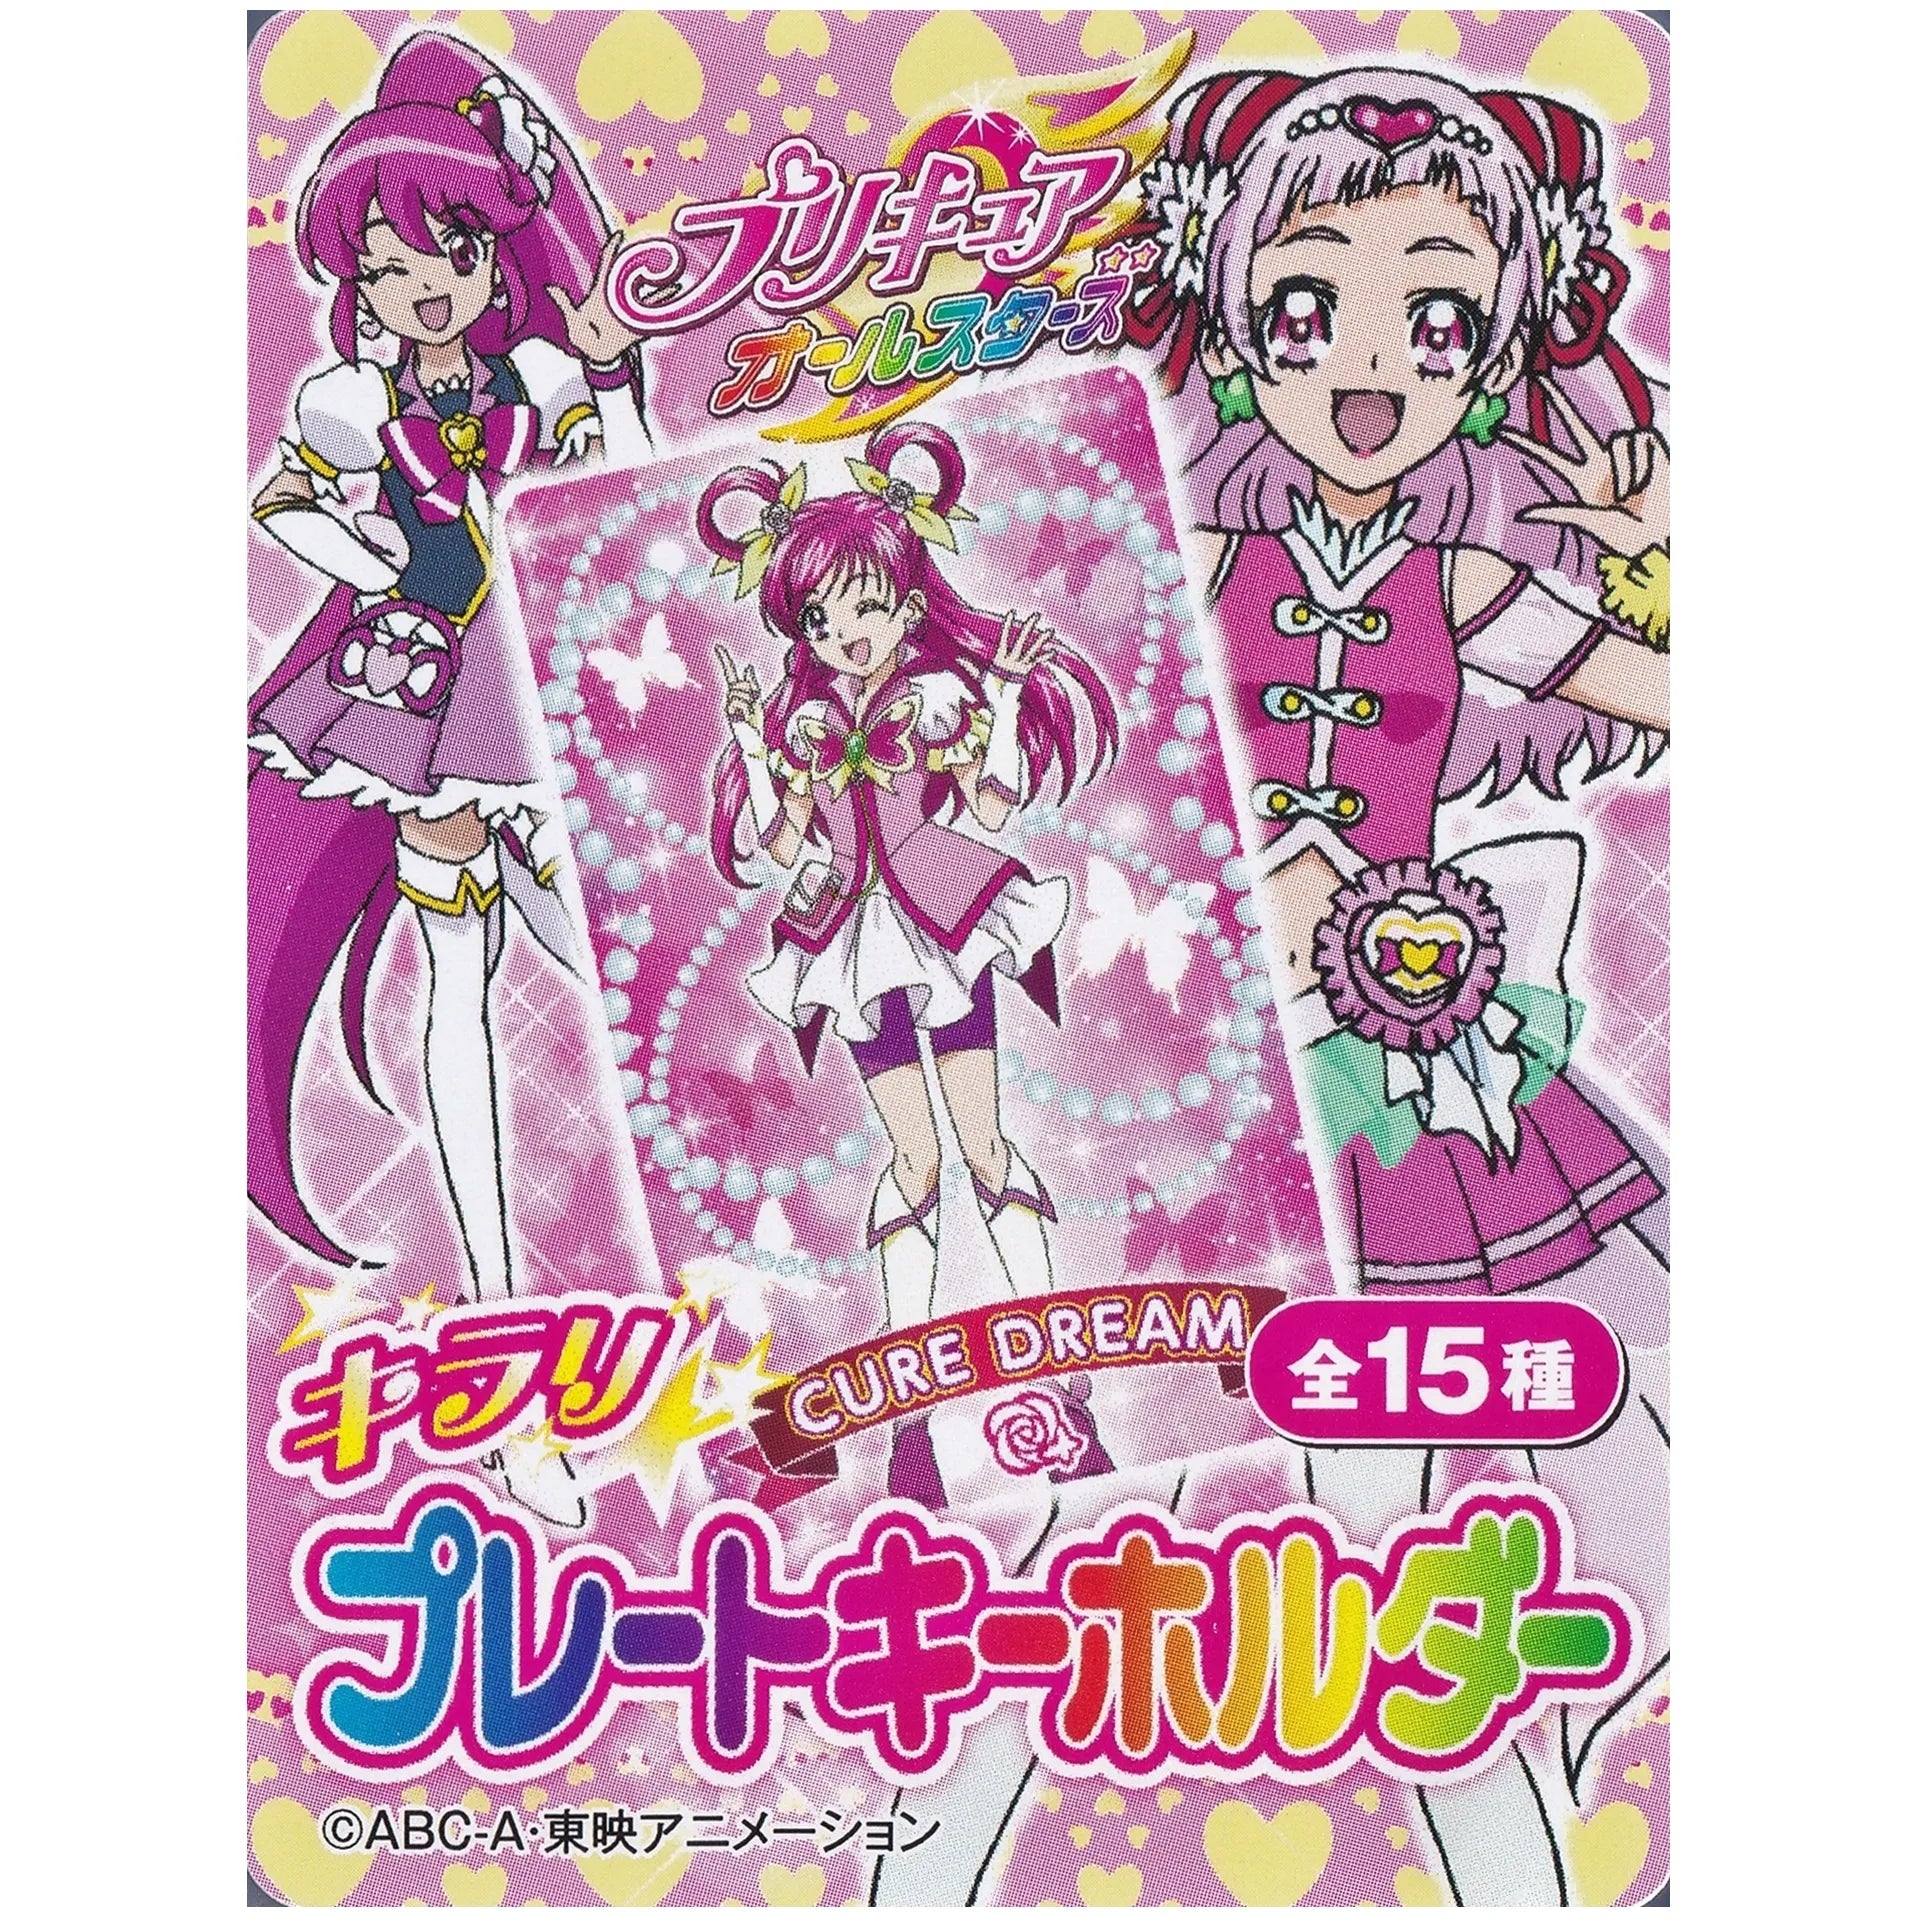 Yes! PreCure 5 GoGo! ～ Product List ～  Precure Shop HappyTogether –  プリキュアのお店☆HappyTogether☆ハッピートゥゲザー